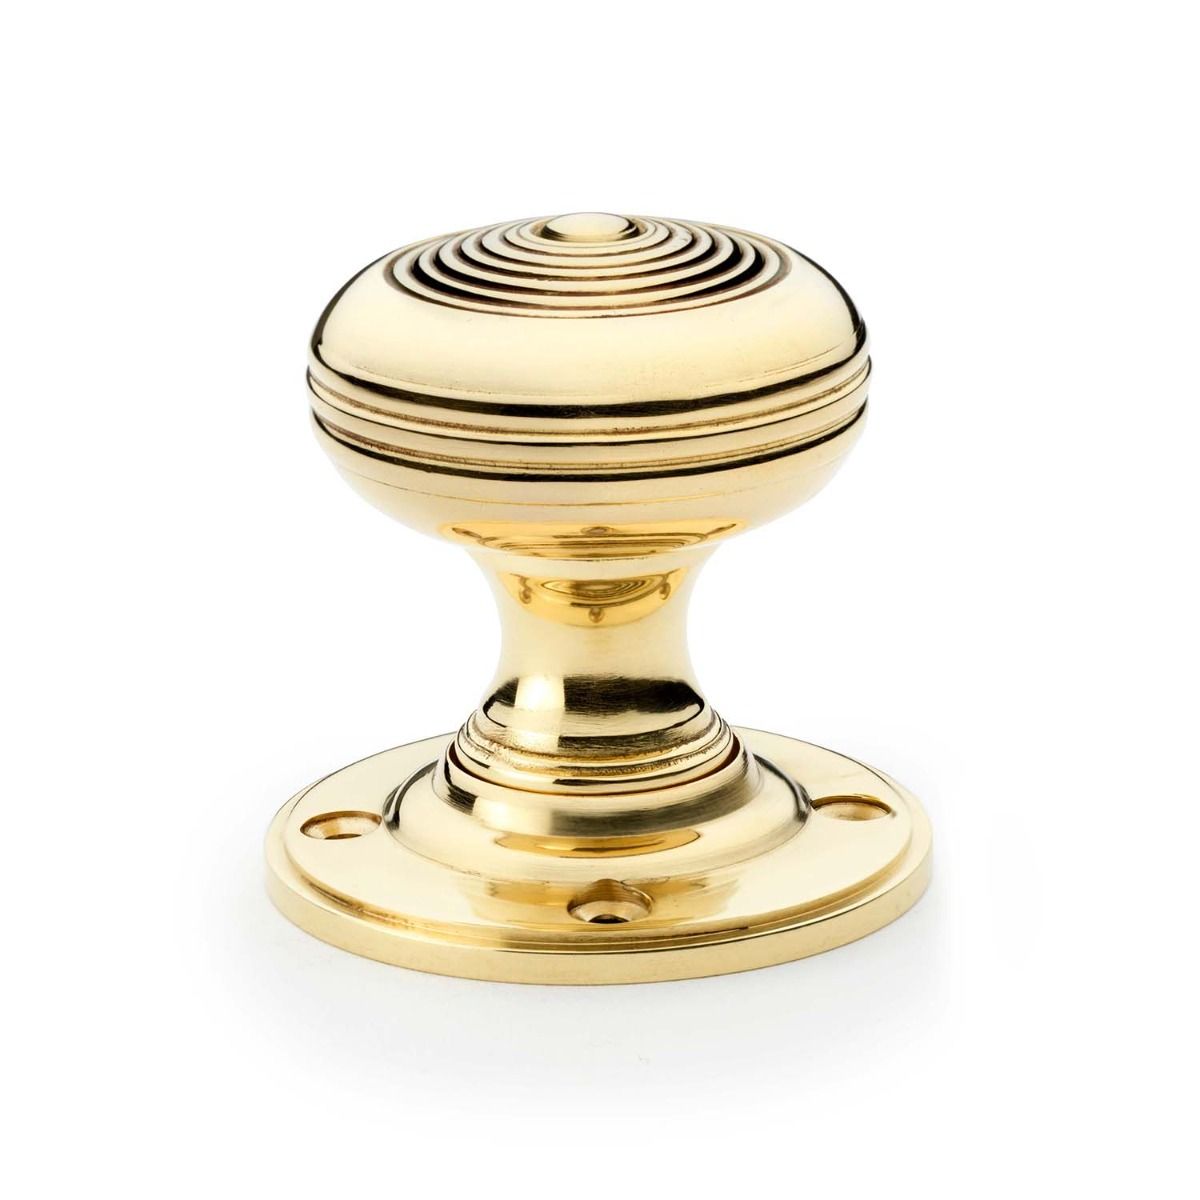 Alexander And Wilks Christoph Mortice Knob 50mm Dia. Unlacquered Brass AW303-50-UB